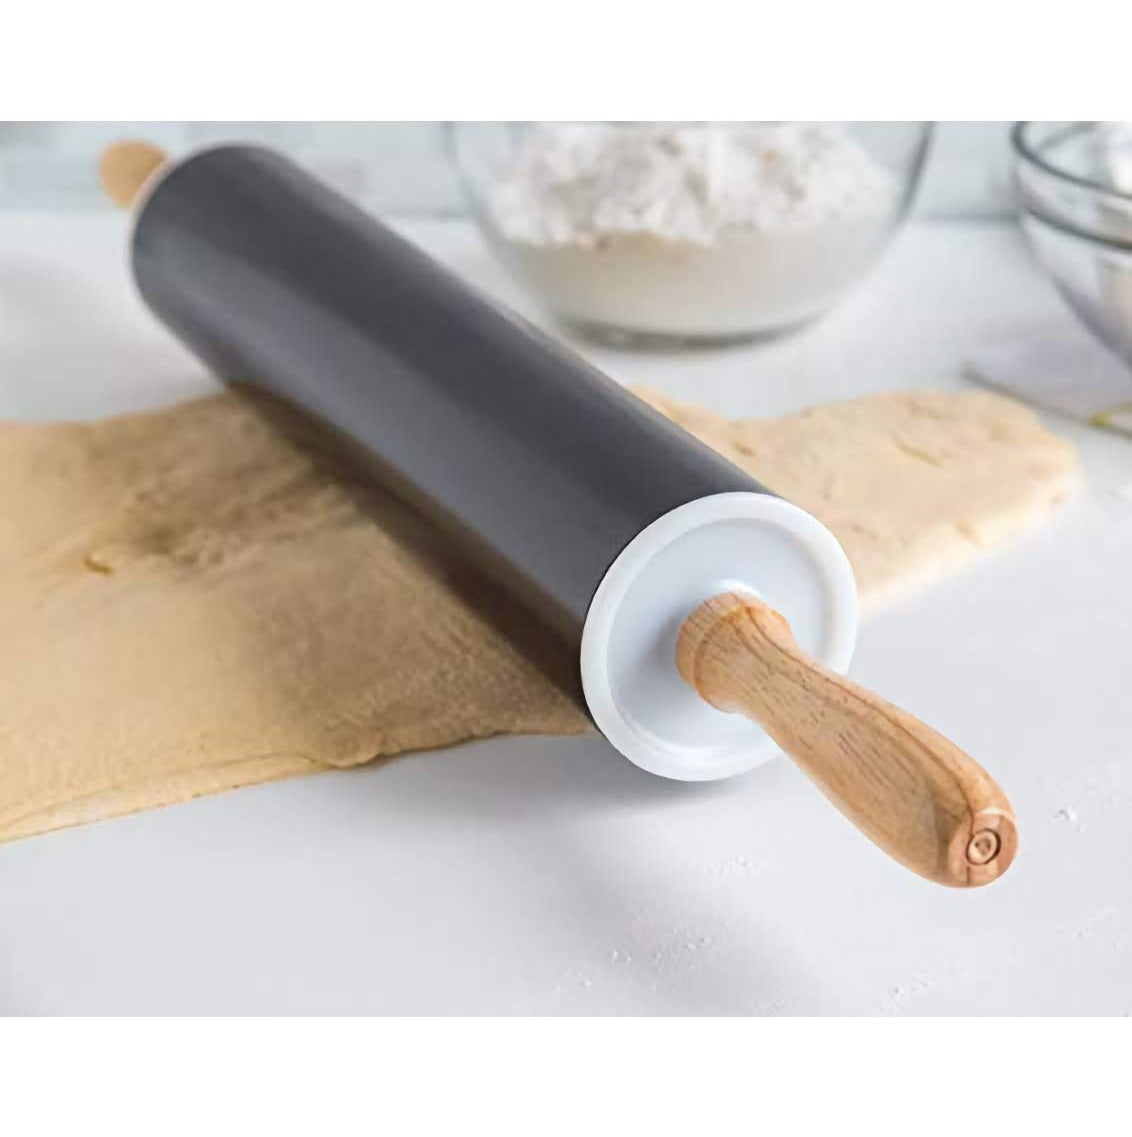 A Black Carbon Rolling Pin on top of some dough being rolled out